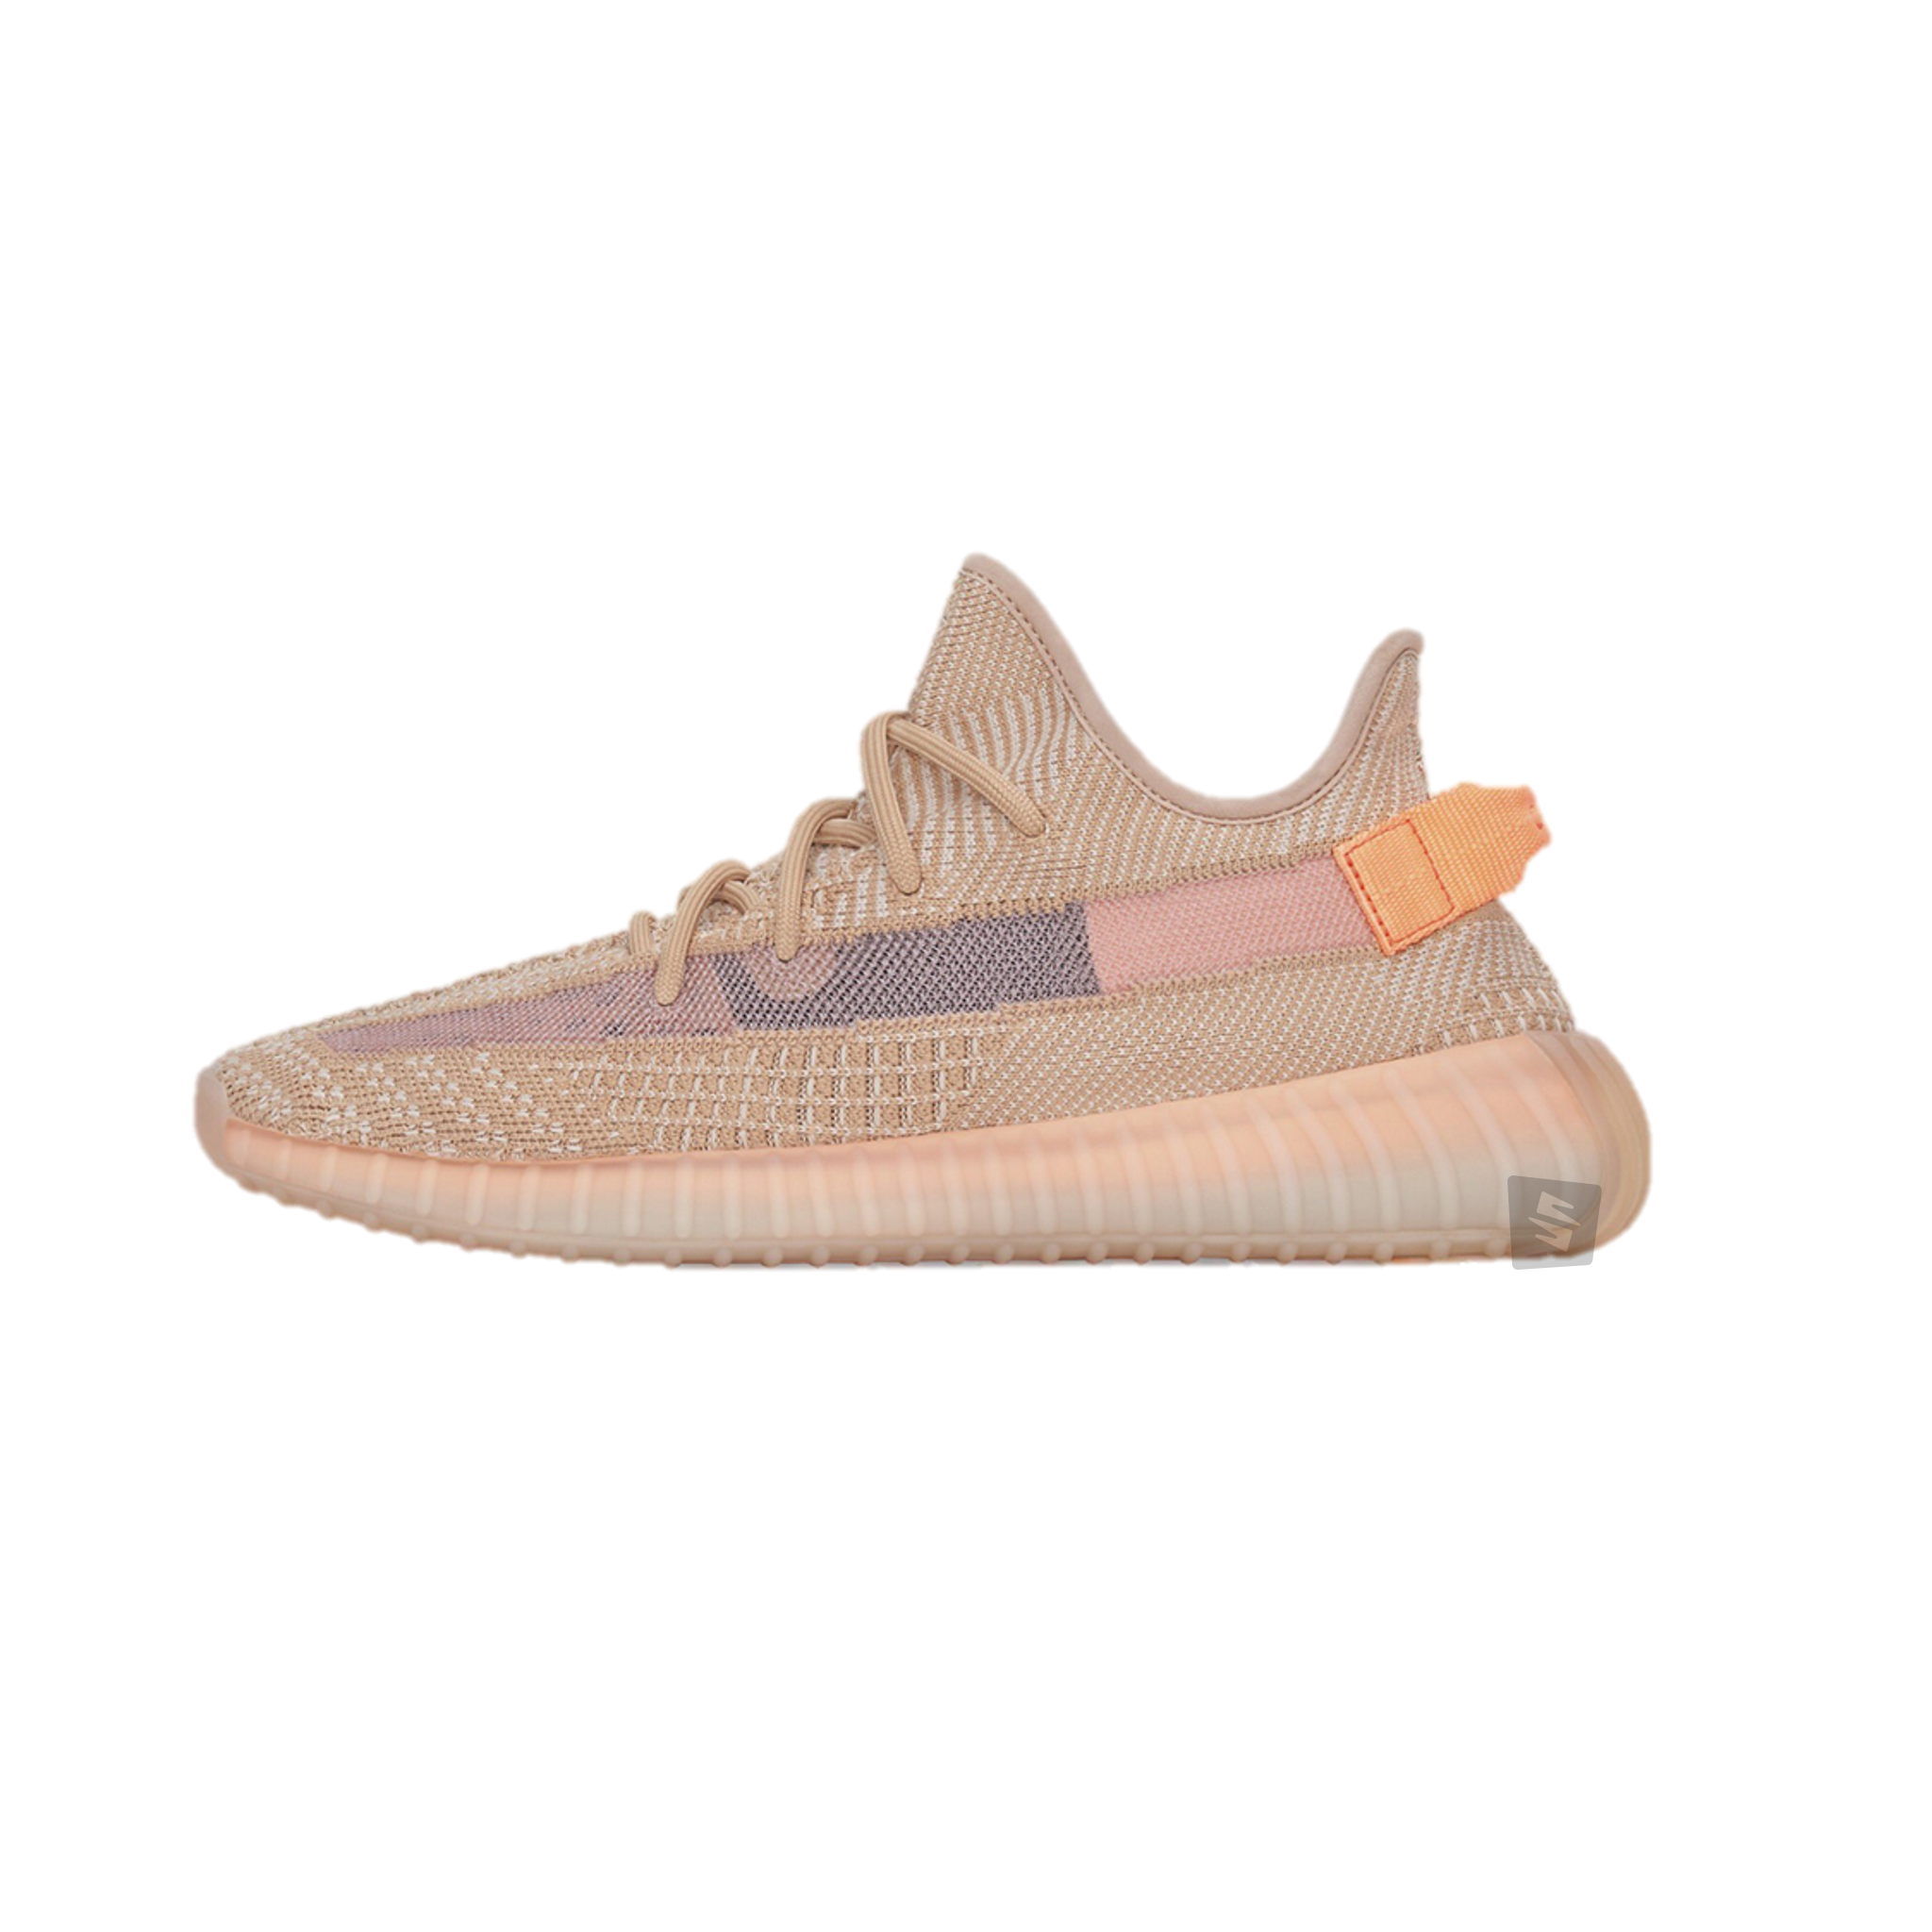 yeezy 350 v2 clay where to buy